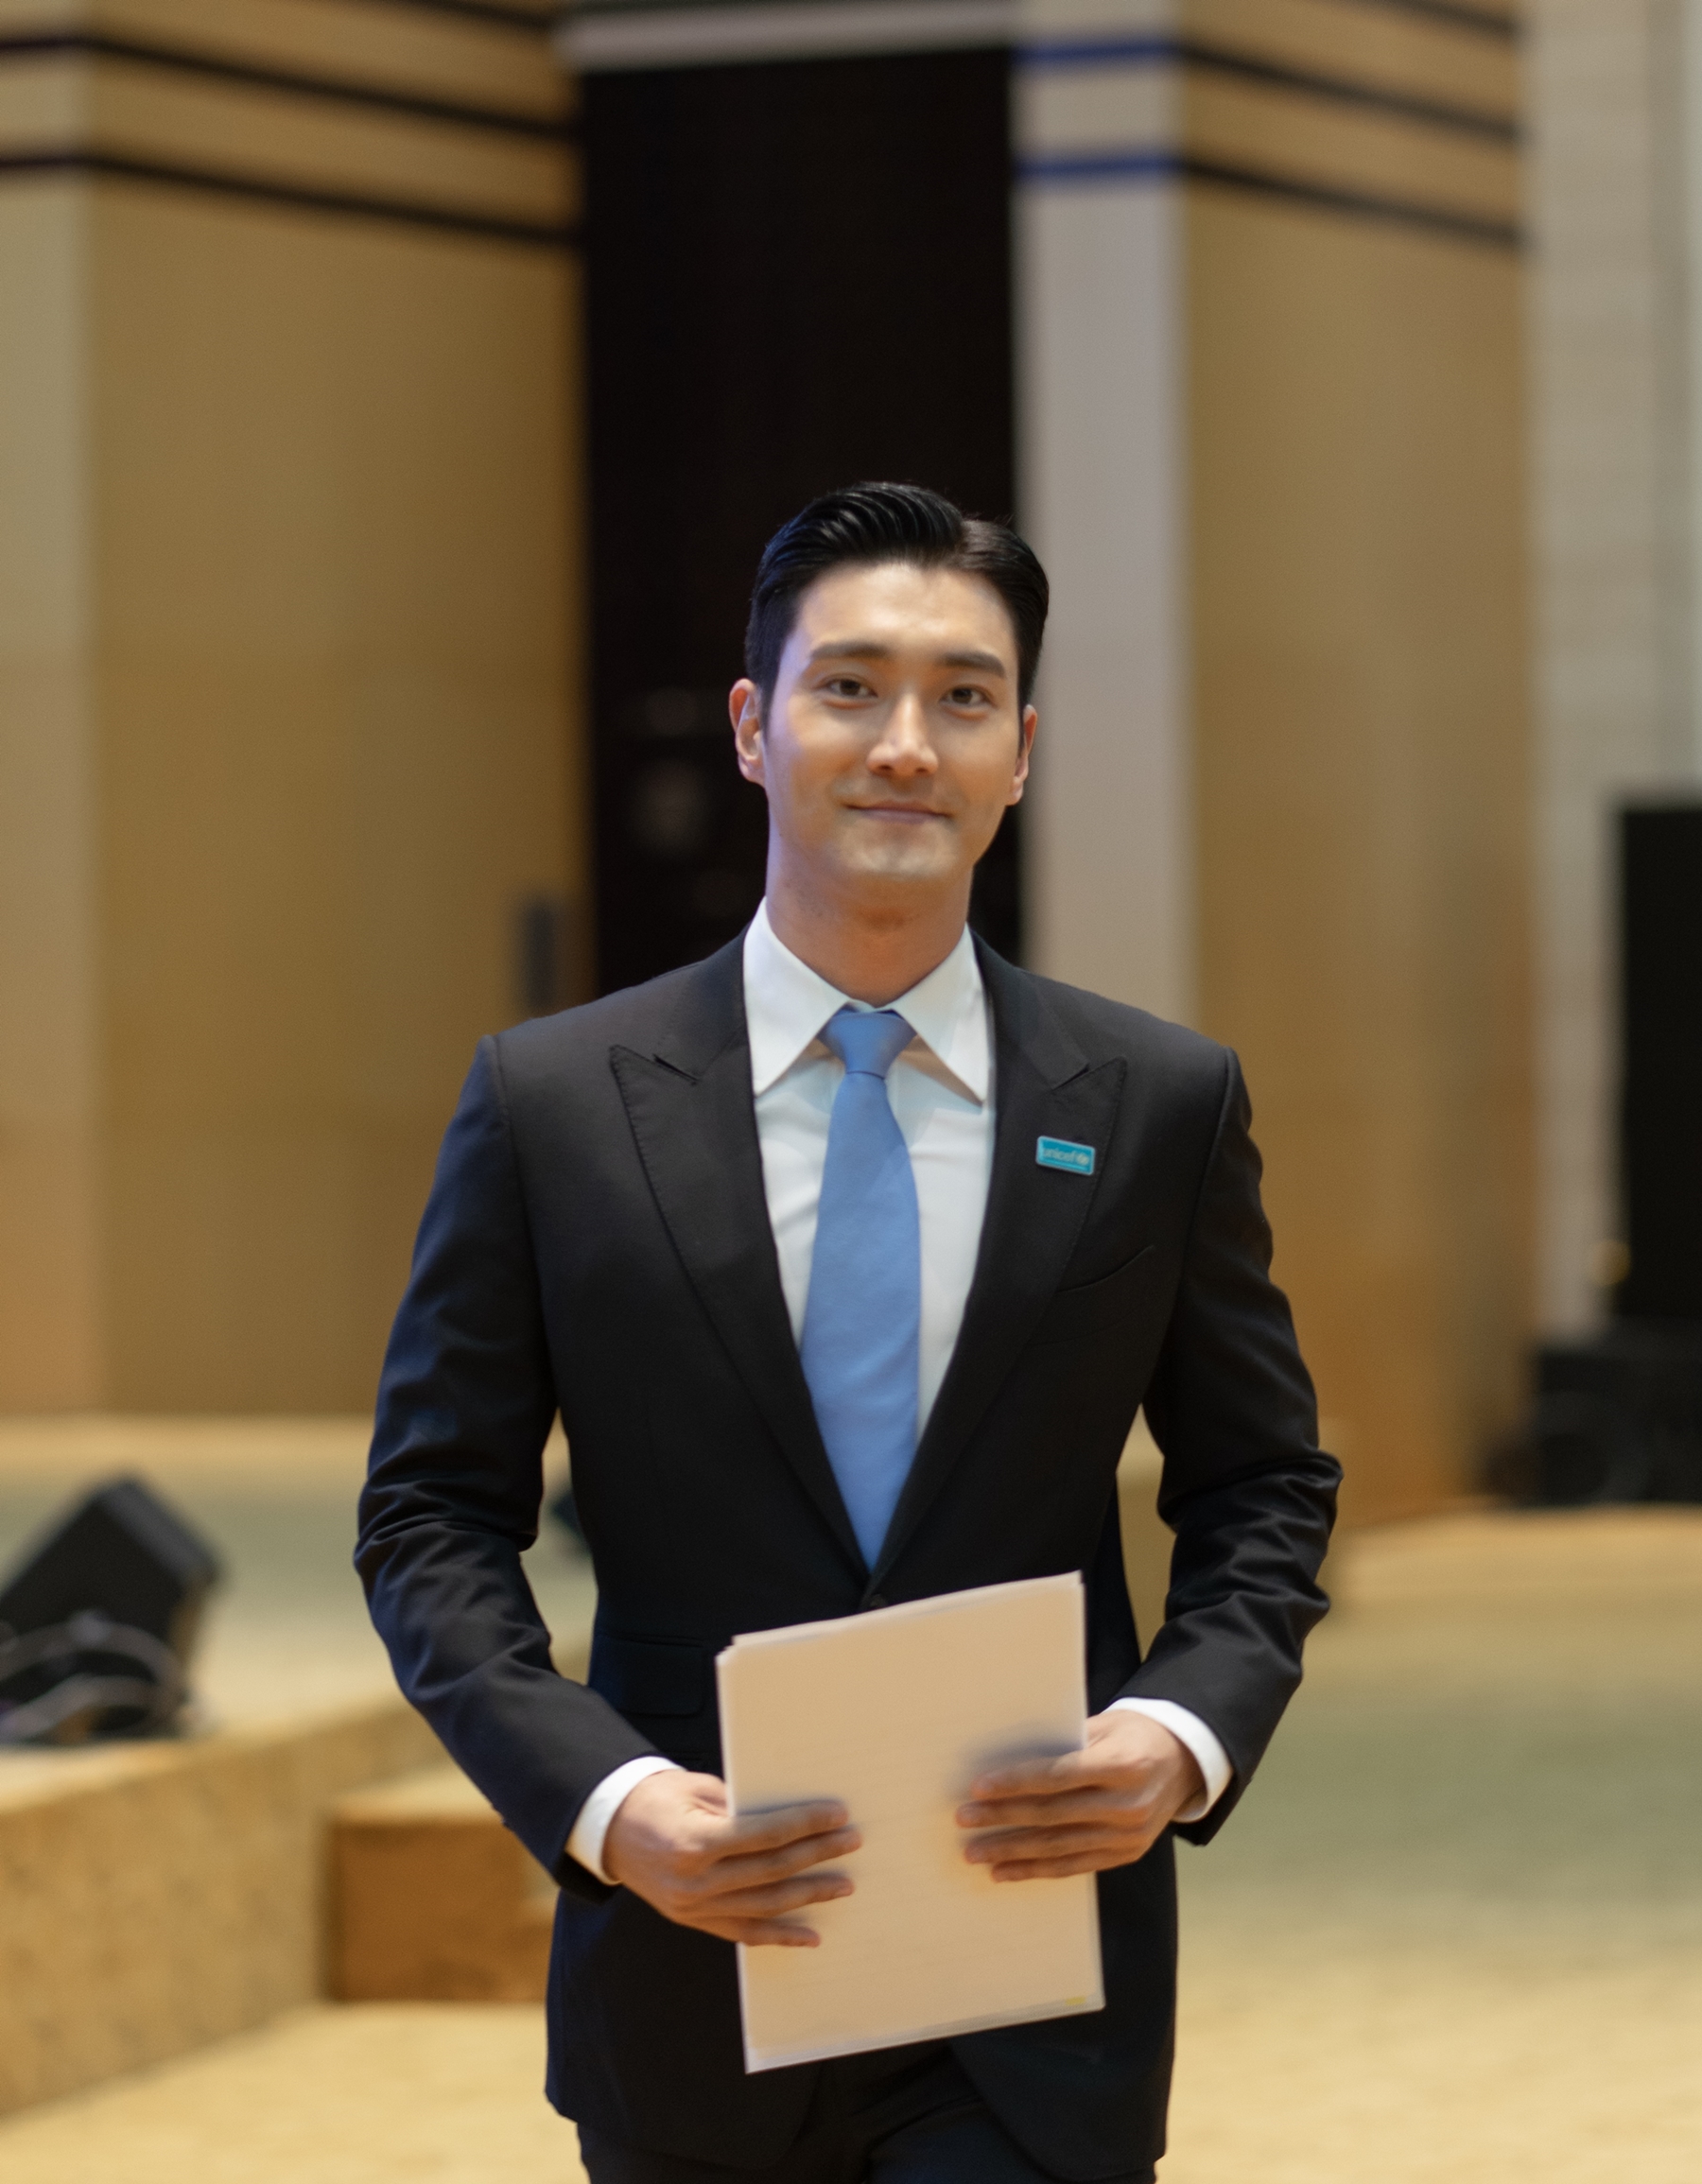 Super Junior Choi Choi Siwon, 32, has been appointed as a goodwill ambassador for the UNICEF East AsiaPacific Ocean region.UNICEF announced on the 12th that Choi Choi Siwons appointment of a goodwill ambassador to the UNICEFEast AsiaPacific Ocean region was held at the Laos Generation 2030 forum co-hosted by the Laos government and UNICEFLaos office to mark the 30th anniversary of the adoption of the UN Convention on the Rights of the Child.It is the first time that Koreans have become goodwill ambassadors representing the UNICEF East AsiaPacific Ocean region.Choi Siwon has contributed a lot to the campaign to prevent child and youth violence in the East AsiaPacific Ocean region, said Karin Hulshoff, director of the UNICEF East AsiaPacific Ocean Regional Office.In particular, he visited Vietnam last month to participate in the Stop Violence Campaign, raising interest in violence inside and outside the school, and leading to the participation of various members to solve problems. Choi Choi Siwon has contributed to the various fund-raising and child rights advocacy of Asian countries as well as Korea after being appointed UNICEF Special Representative in November 2015.After the appointment ceremony, Choi Siwon visited Nongnio Elementary School in Vientiane and participated in the handwashing campaign and met radio youth hosts from the state broadcasting station.Choi Choi Siwon will participate in the rights promotion and protection activities of Asian children along with another goodwill ambassador, Hong Kong actor Agnes Chan.